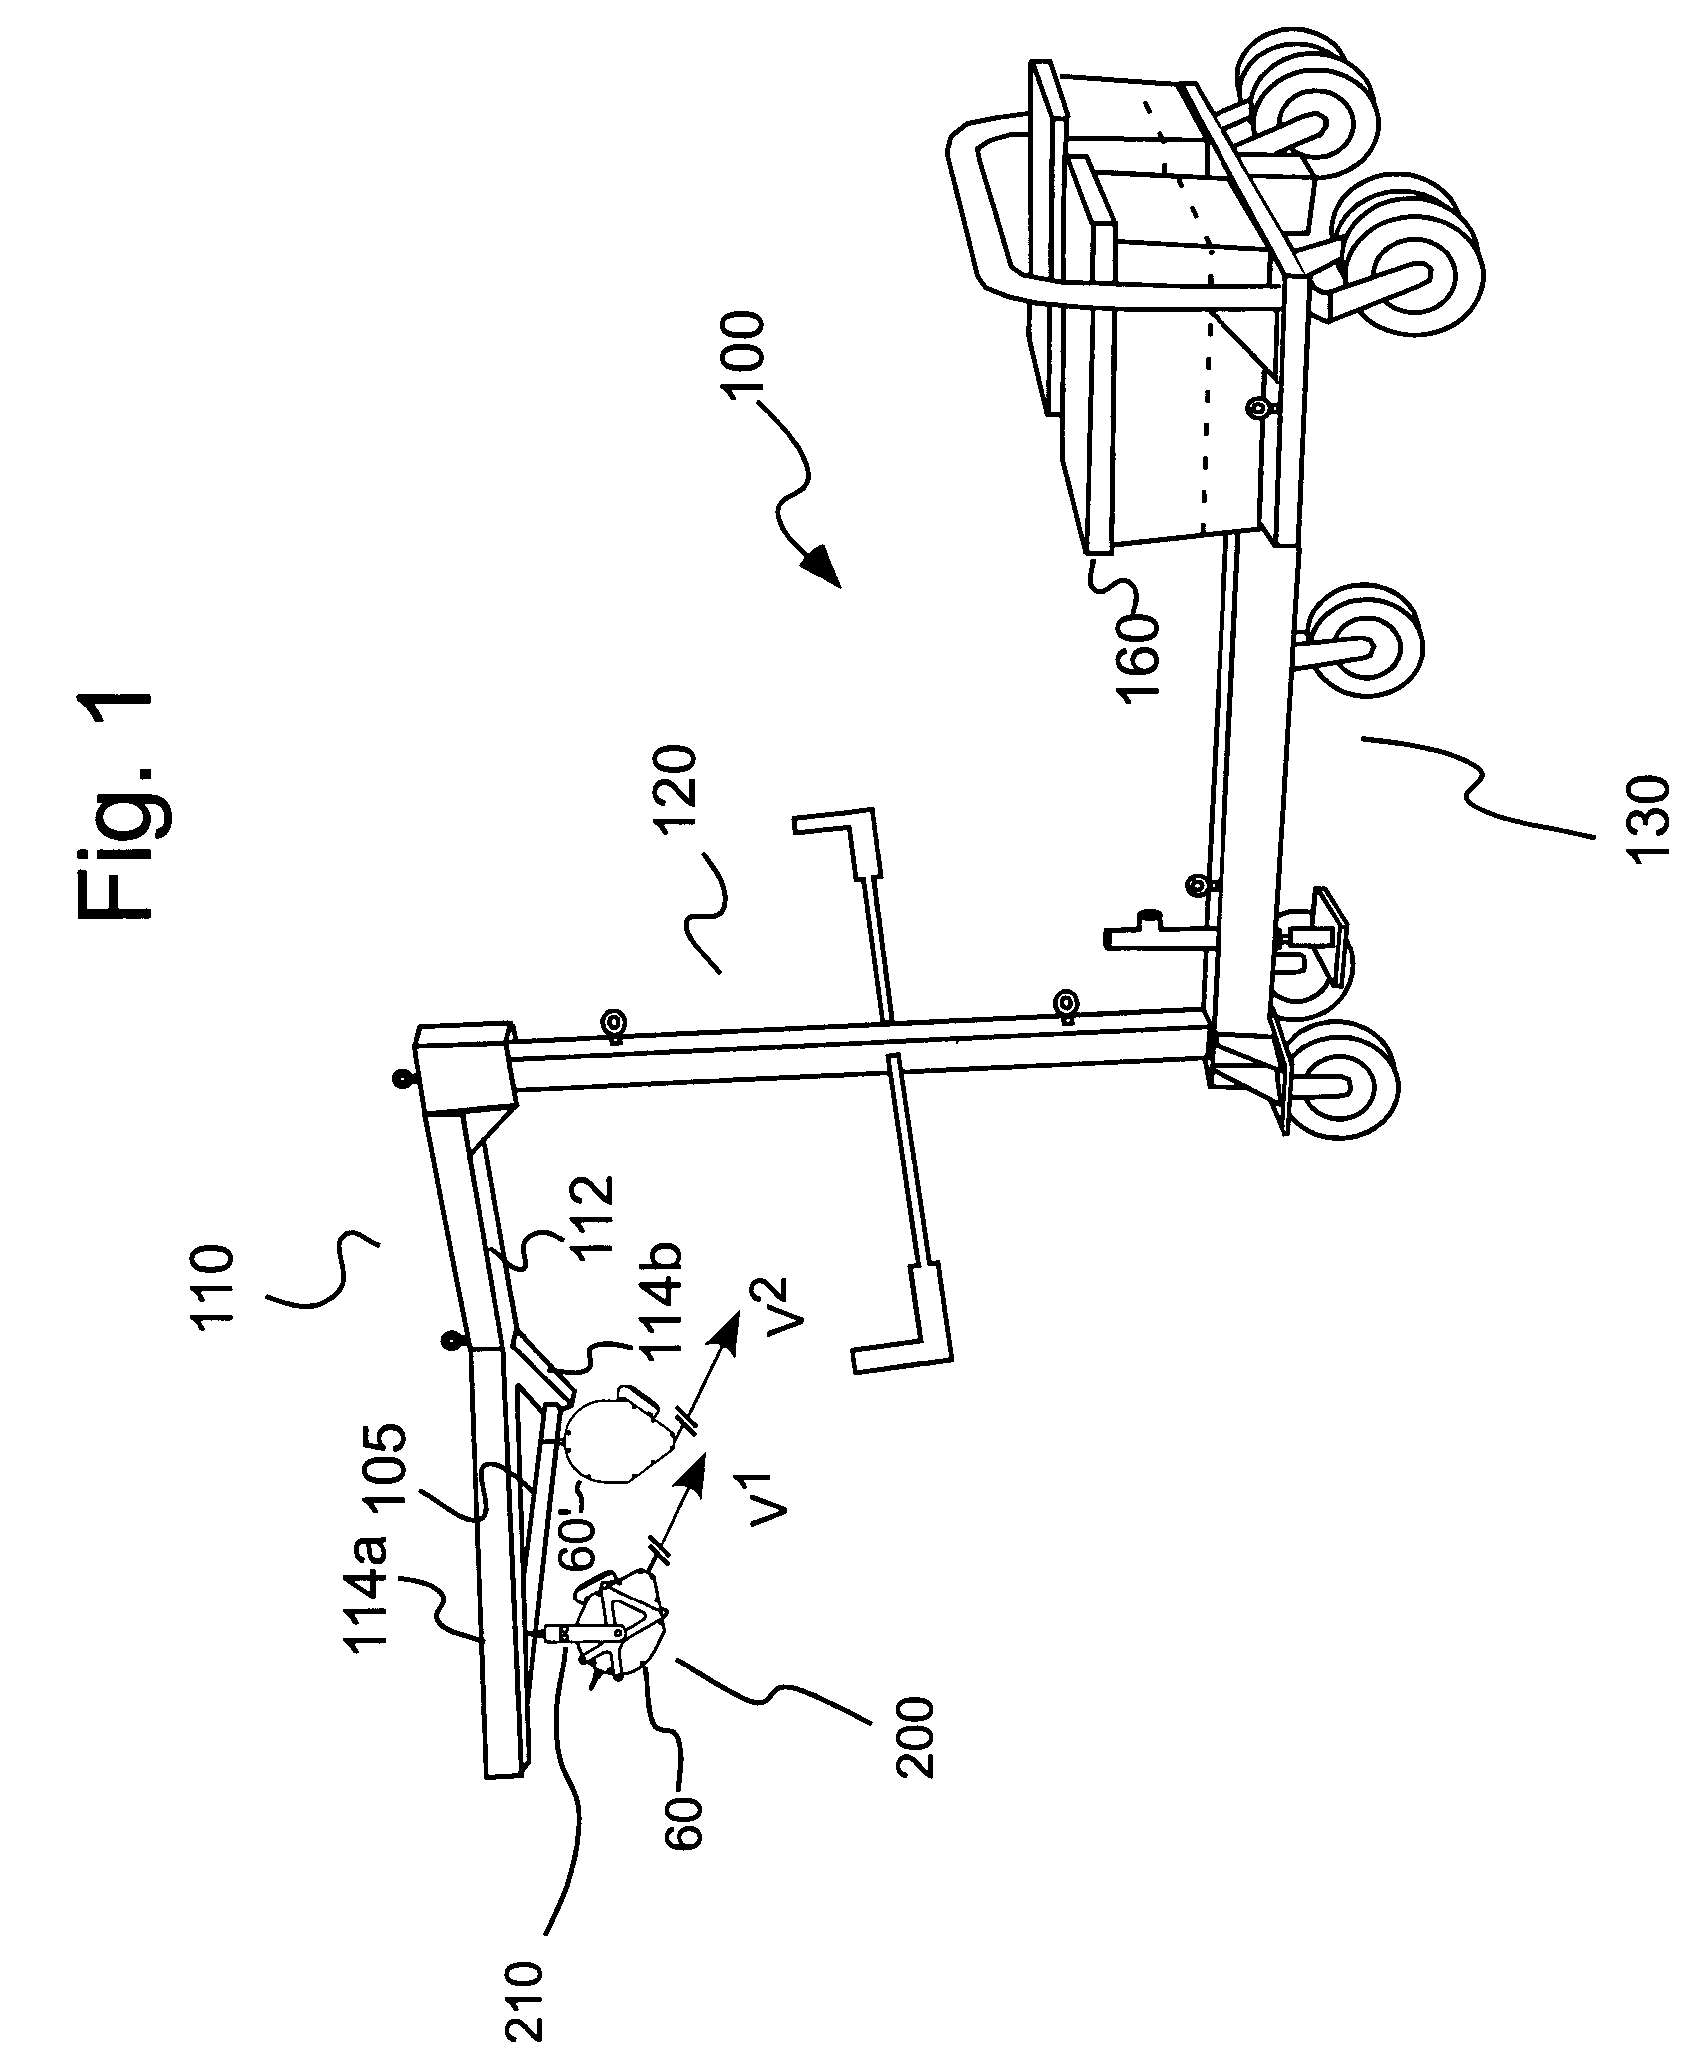 Retractable lanyard systems, anchoring brackets for retractable lanyards and methods of anchoring retractable lanyards